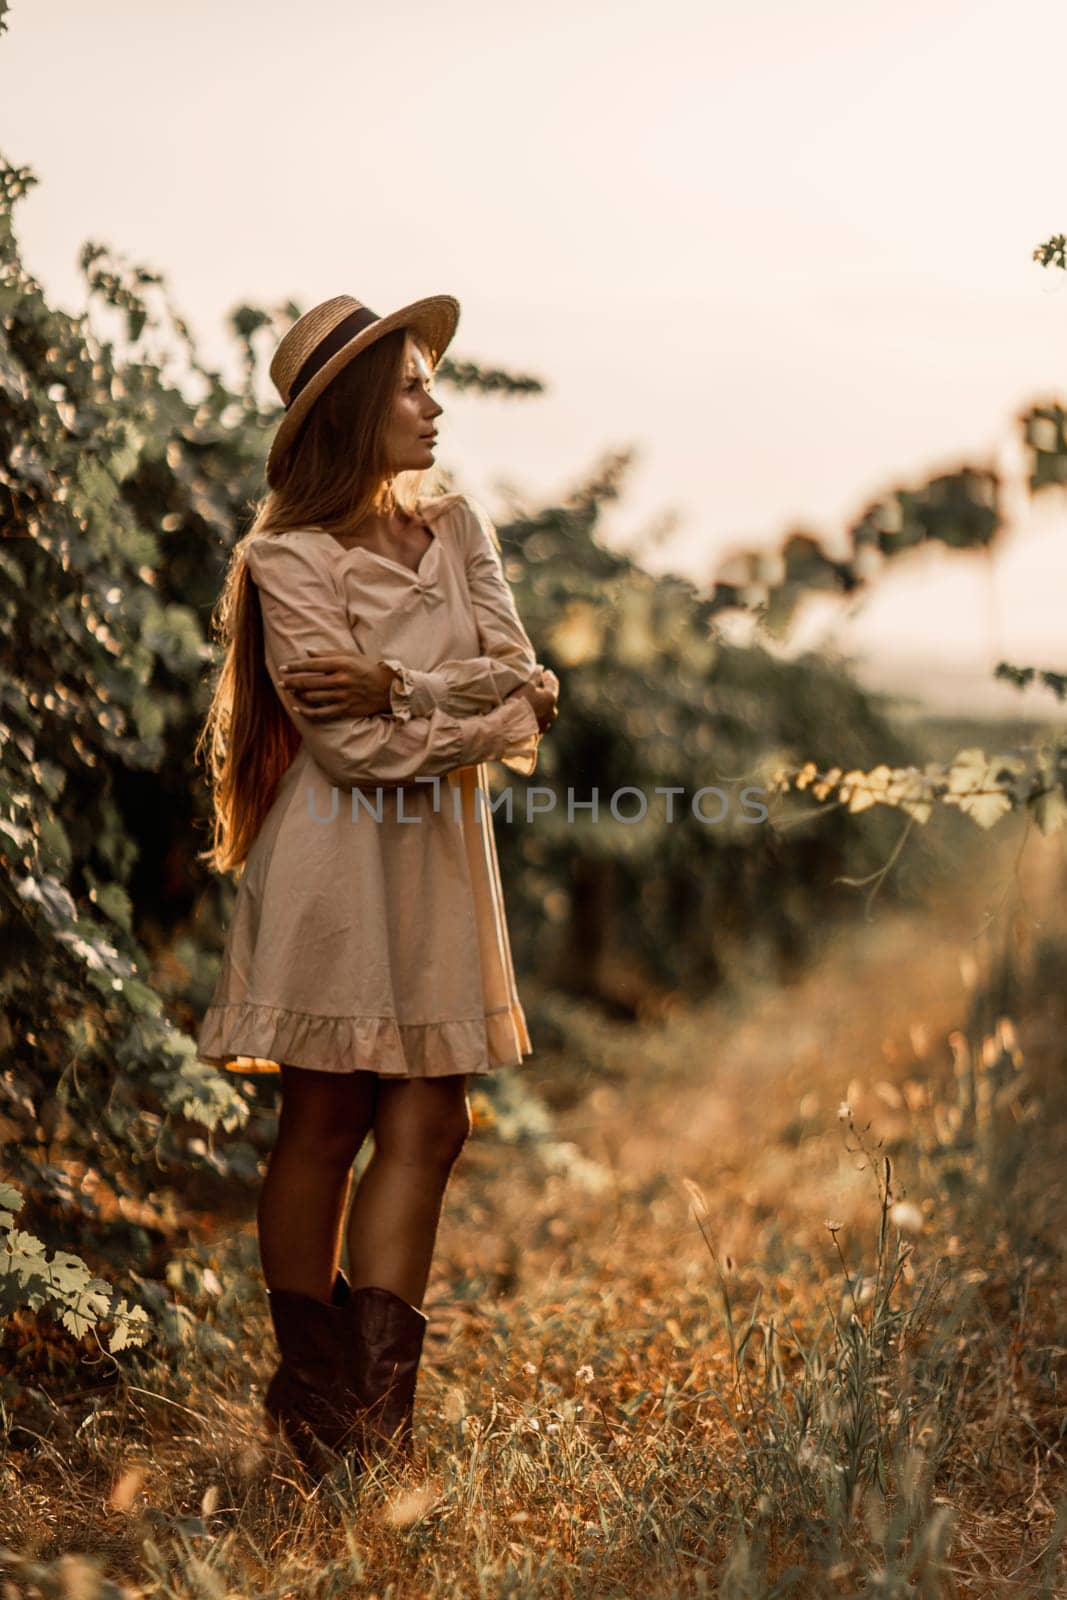 Woman with straw hat stands in front of vineyard. She is wearing a light dress and posing for a photo. Travel concept to different countries.